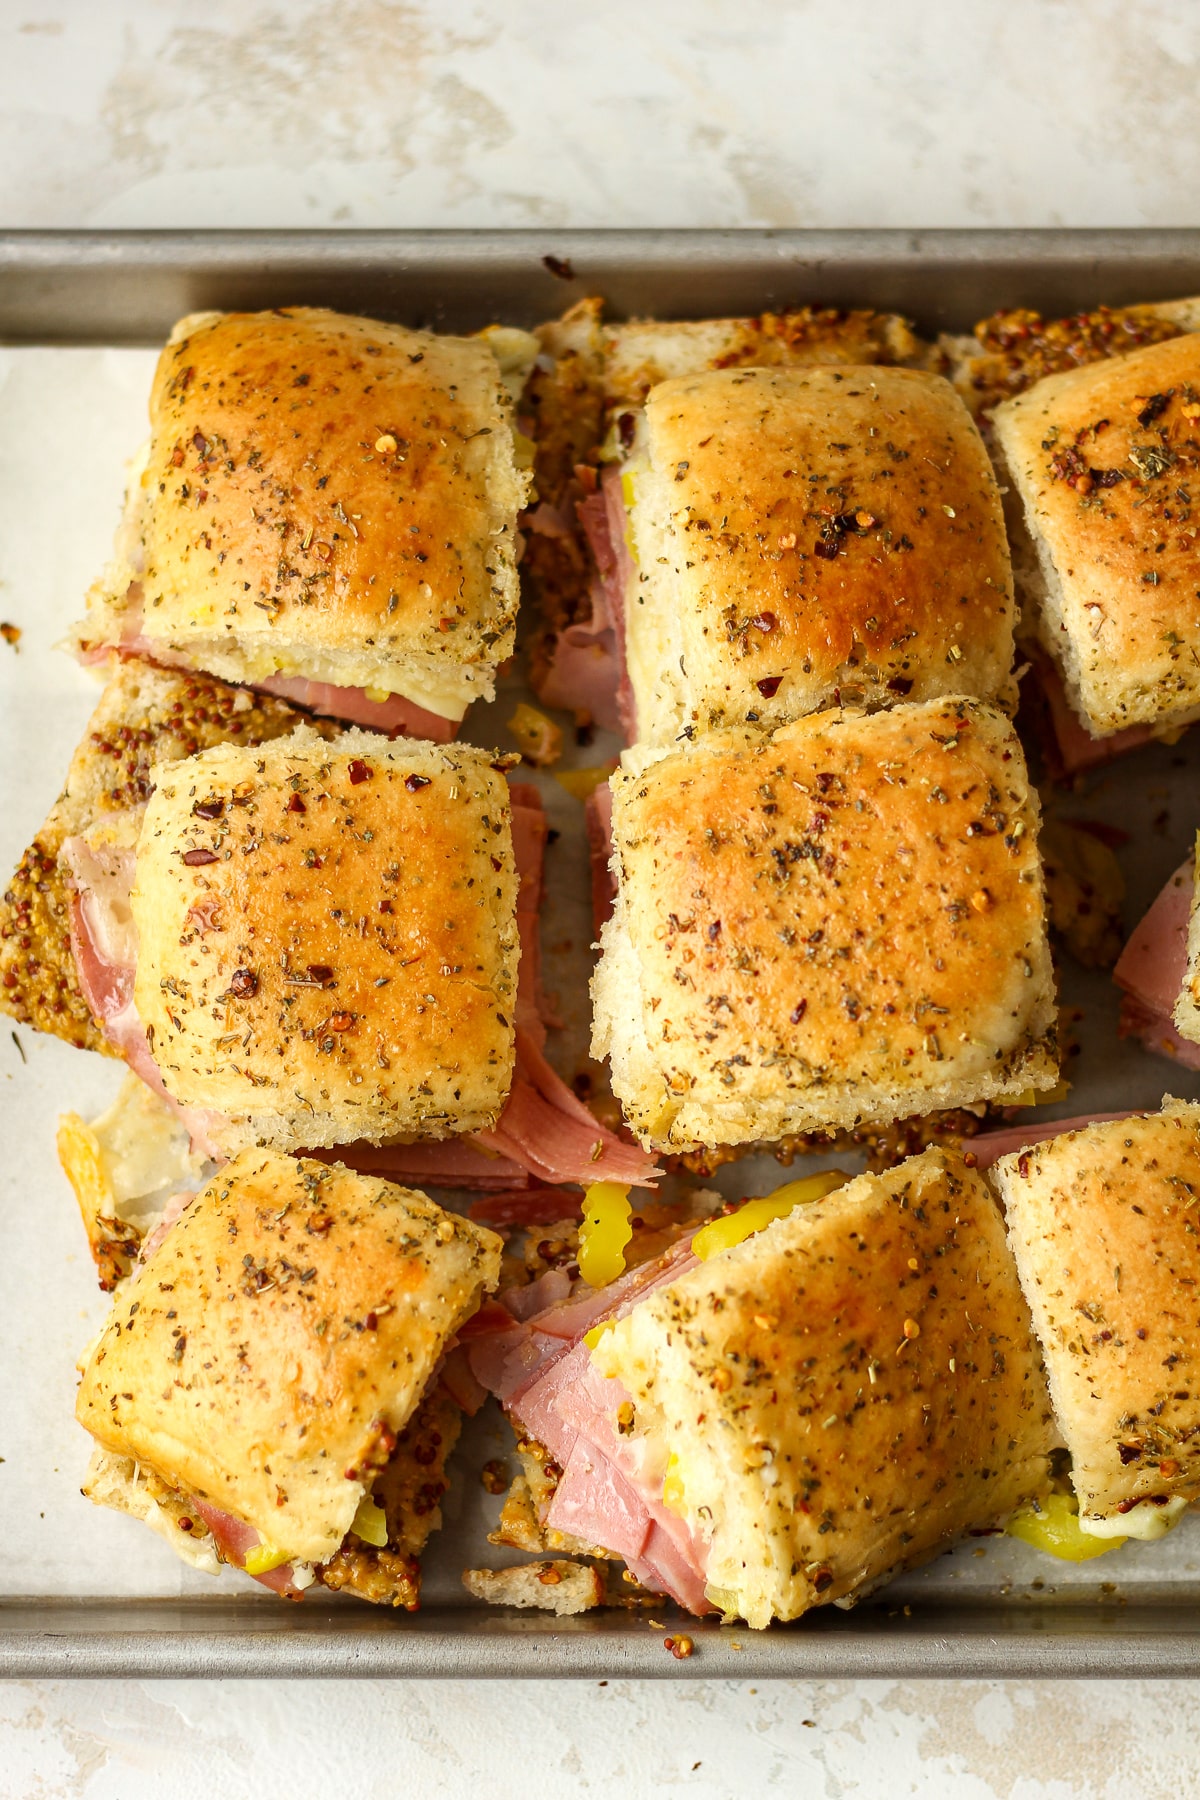 Overhead view of some cut slider sandwiches.